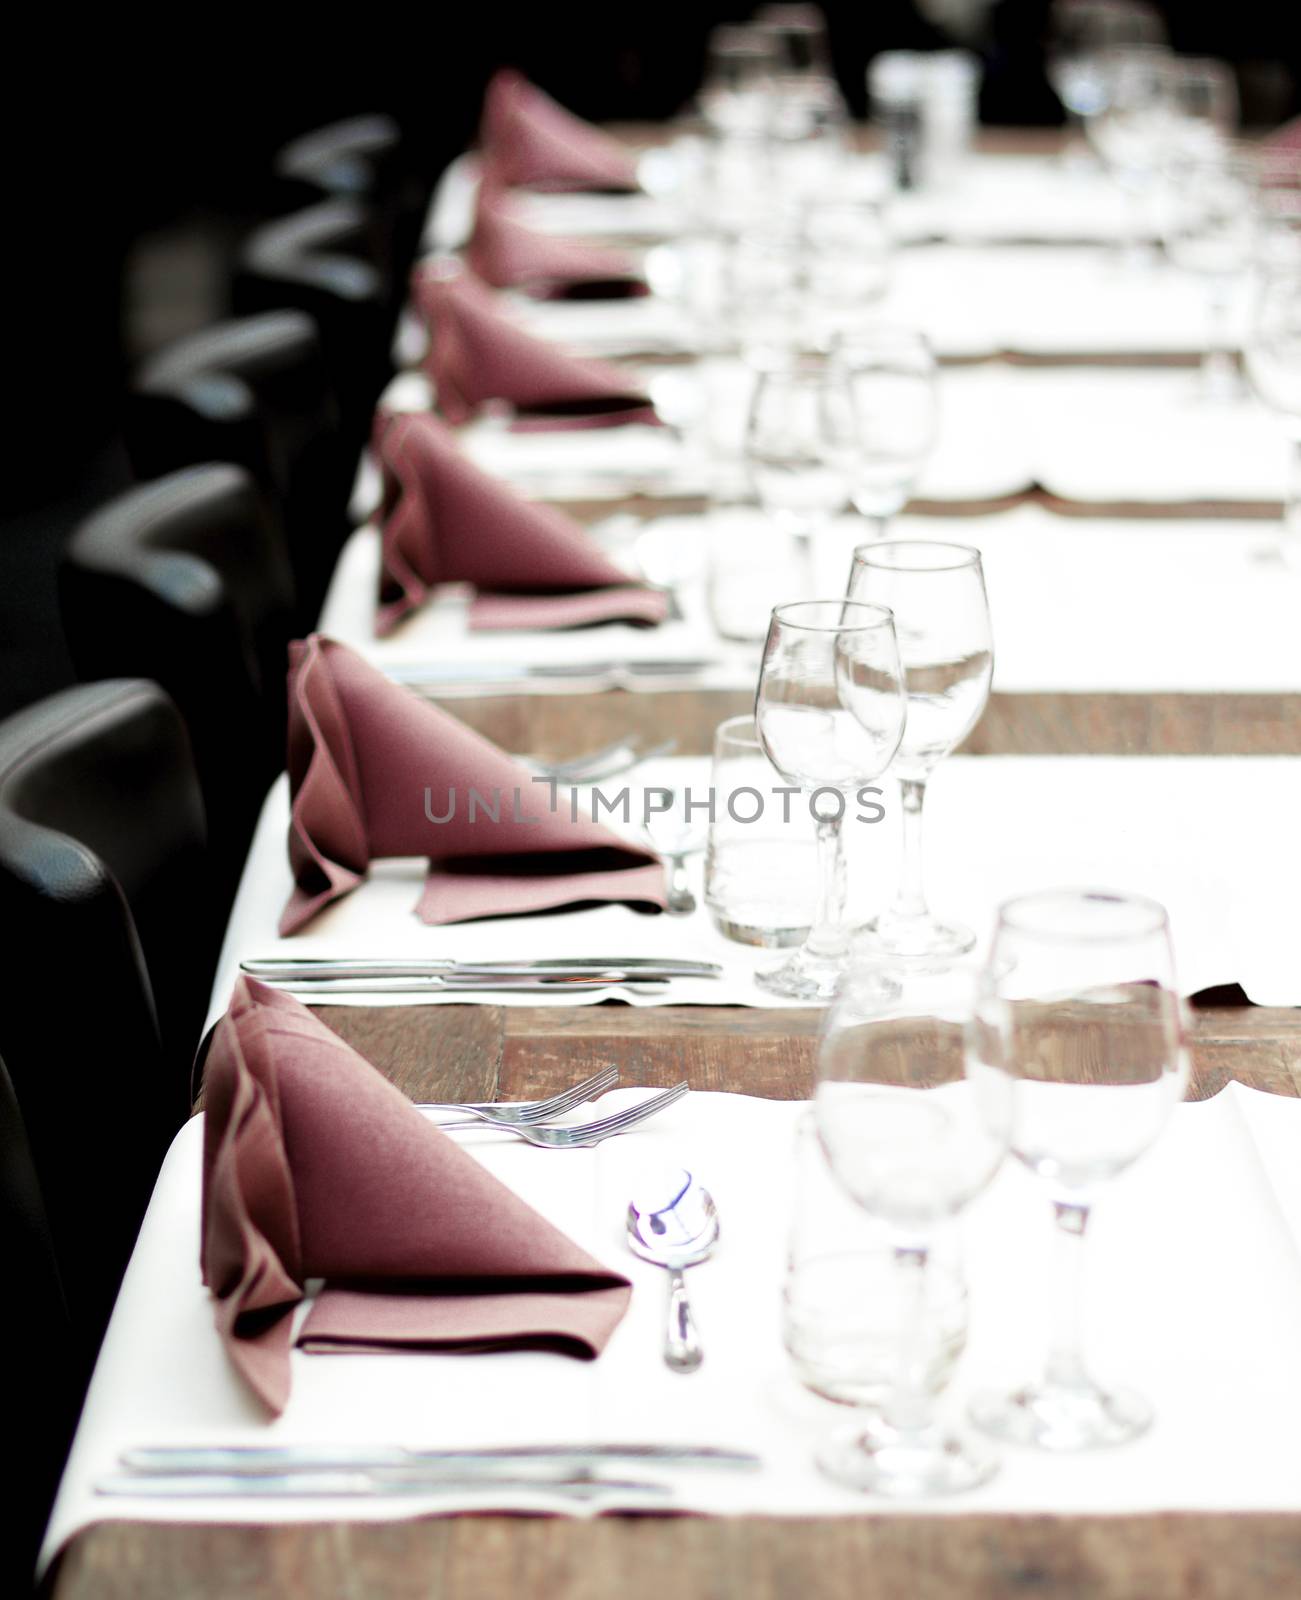 Restaurant Table Setting with Glasses, Silverware and Napkins on Vintage Wooden Table with Chairs closeup. Focus on Forks